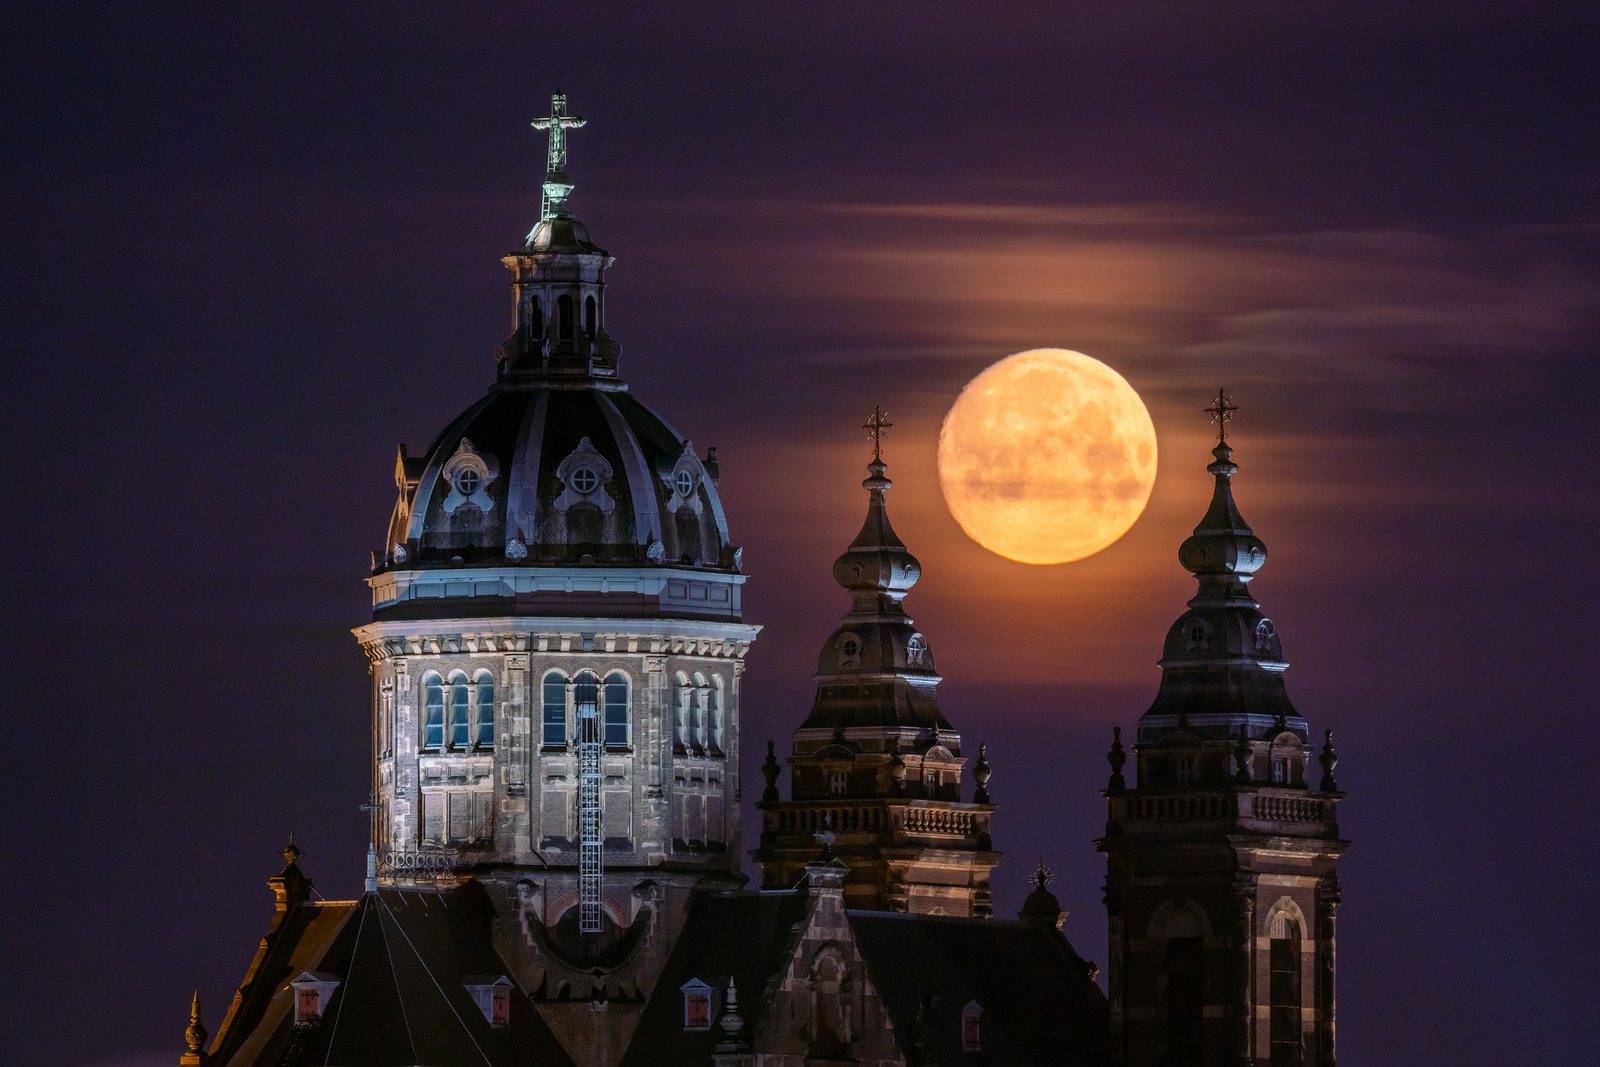 General 1600x1067 architecture tower castle moonlight Moon cathedral cross night ancient Amsterdam Netherlands full moon